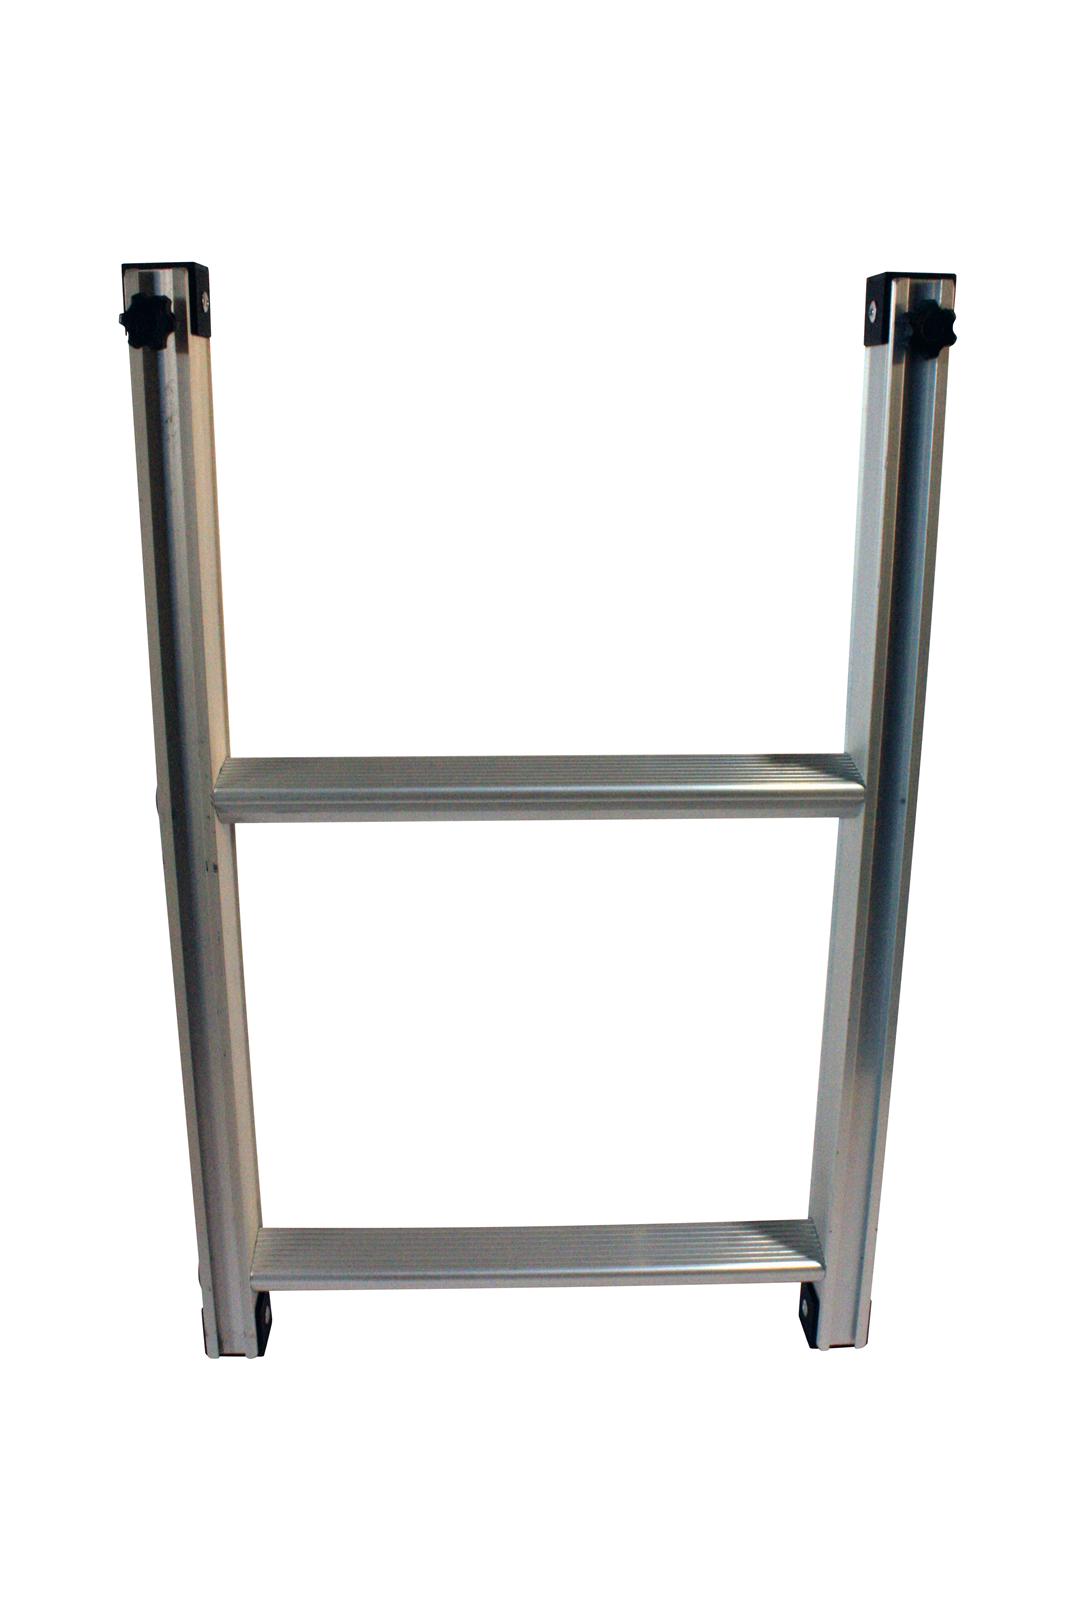 TJM Off-Road Rooftop Tent Ladder Extensions - Click Image to Close